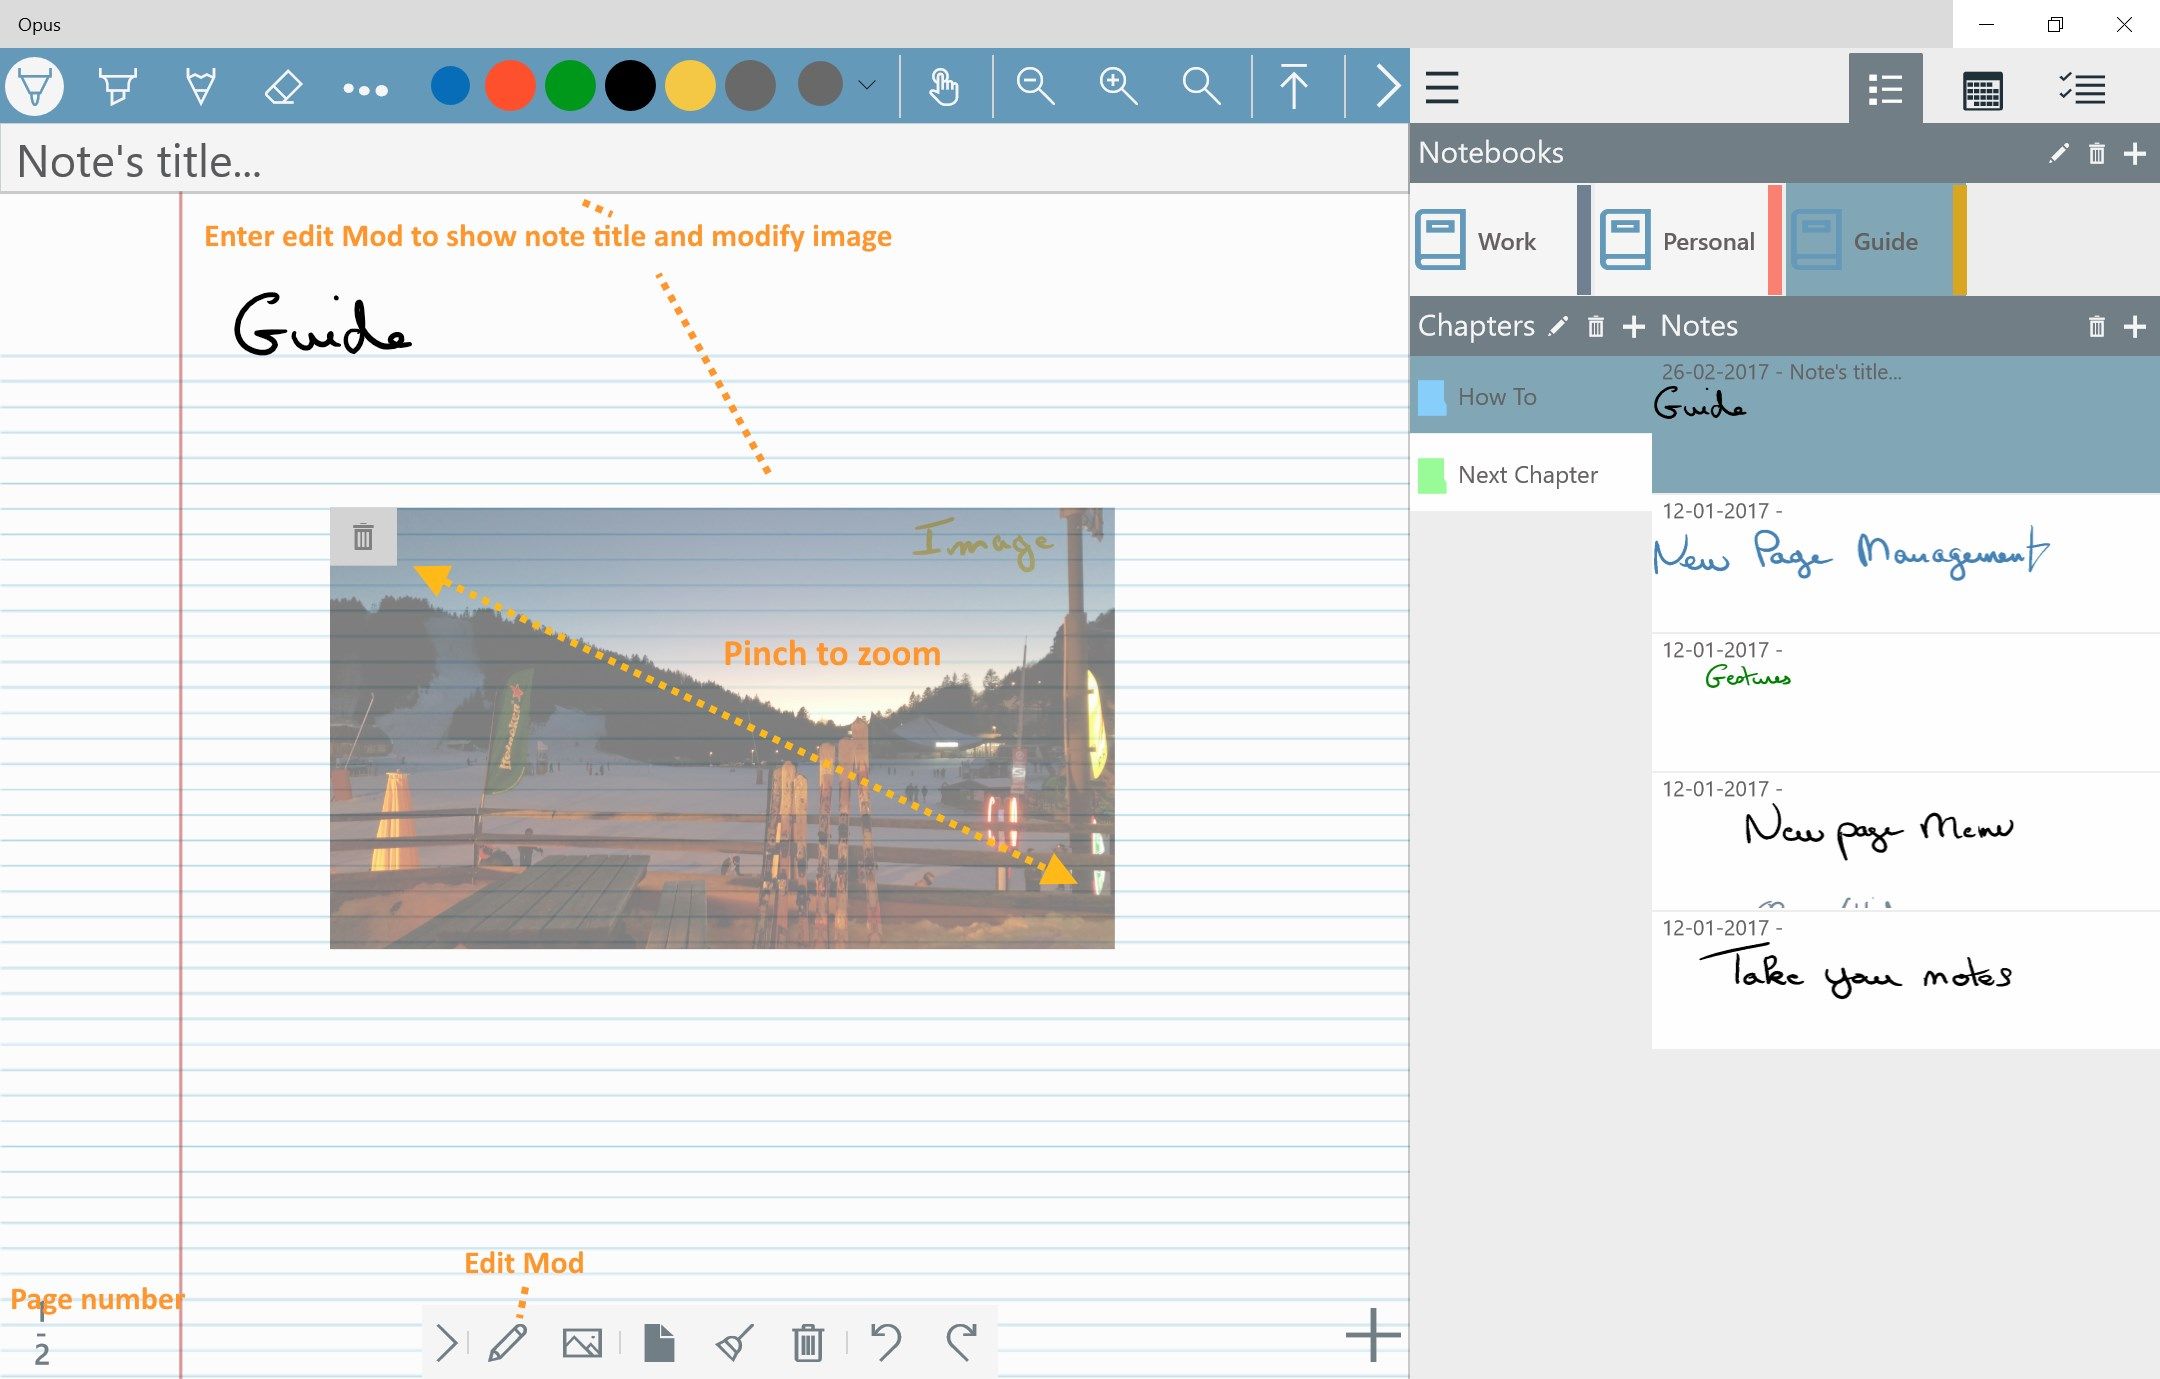 Import images in your notes.